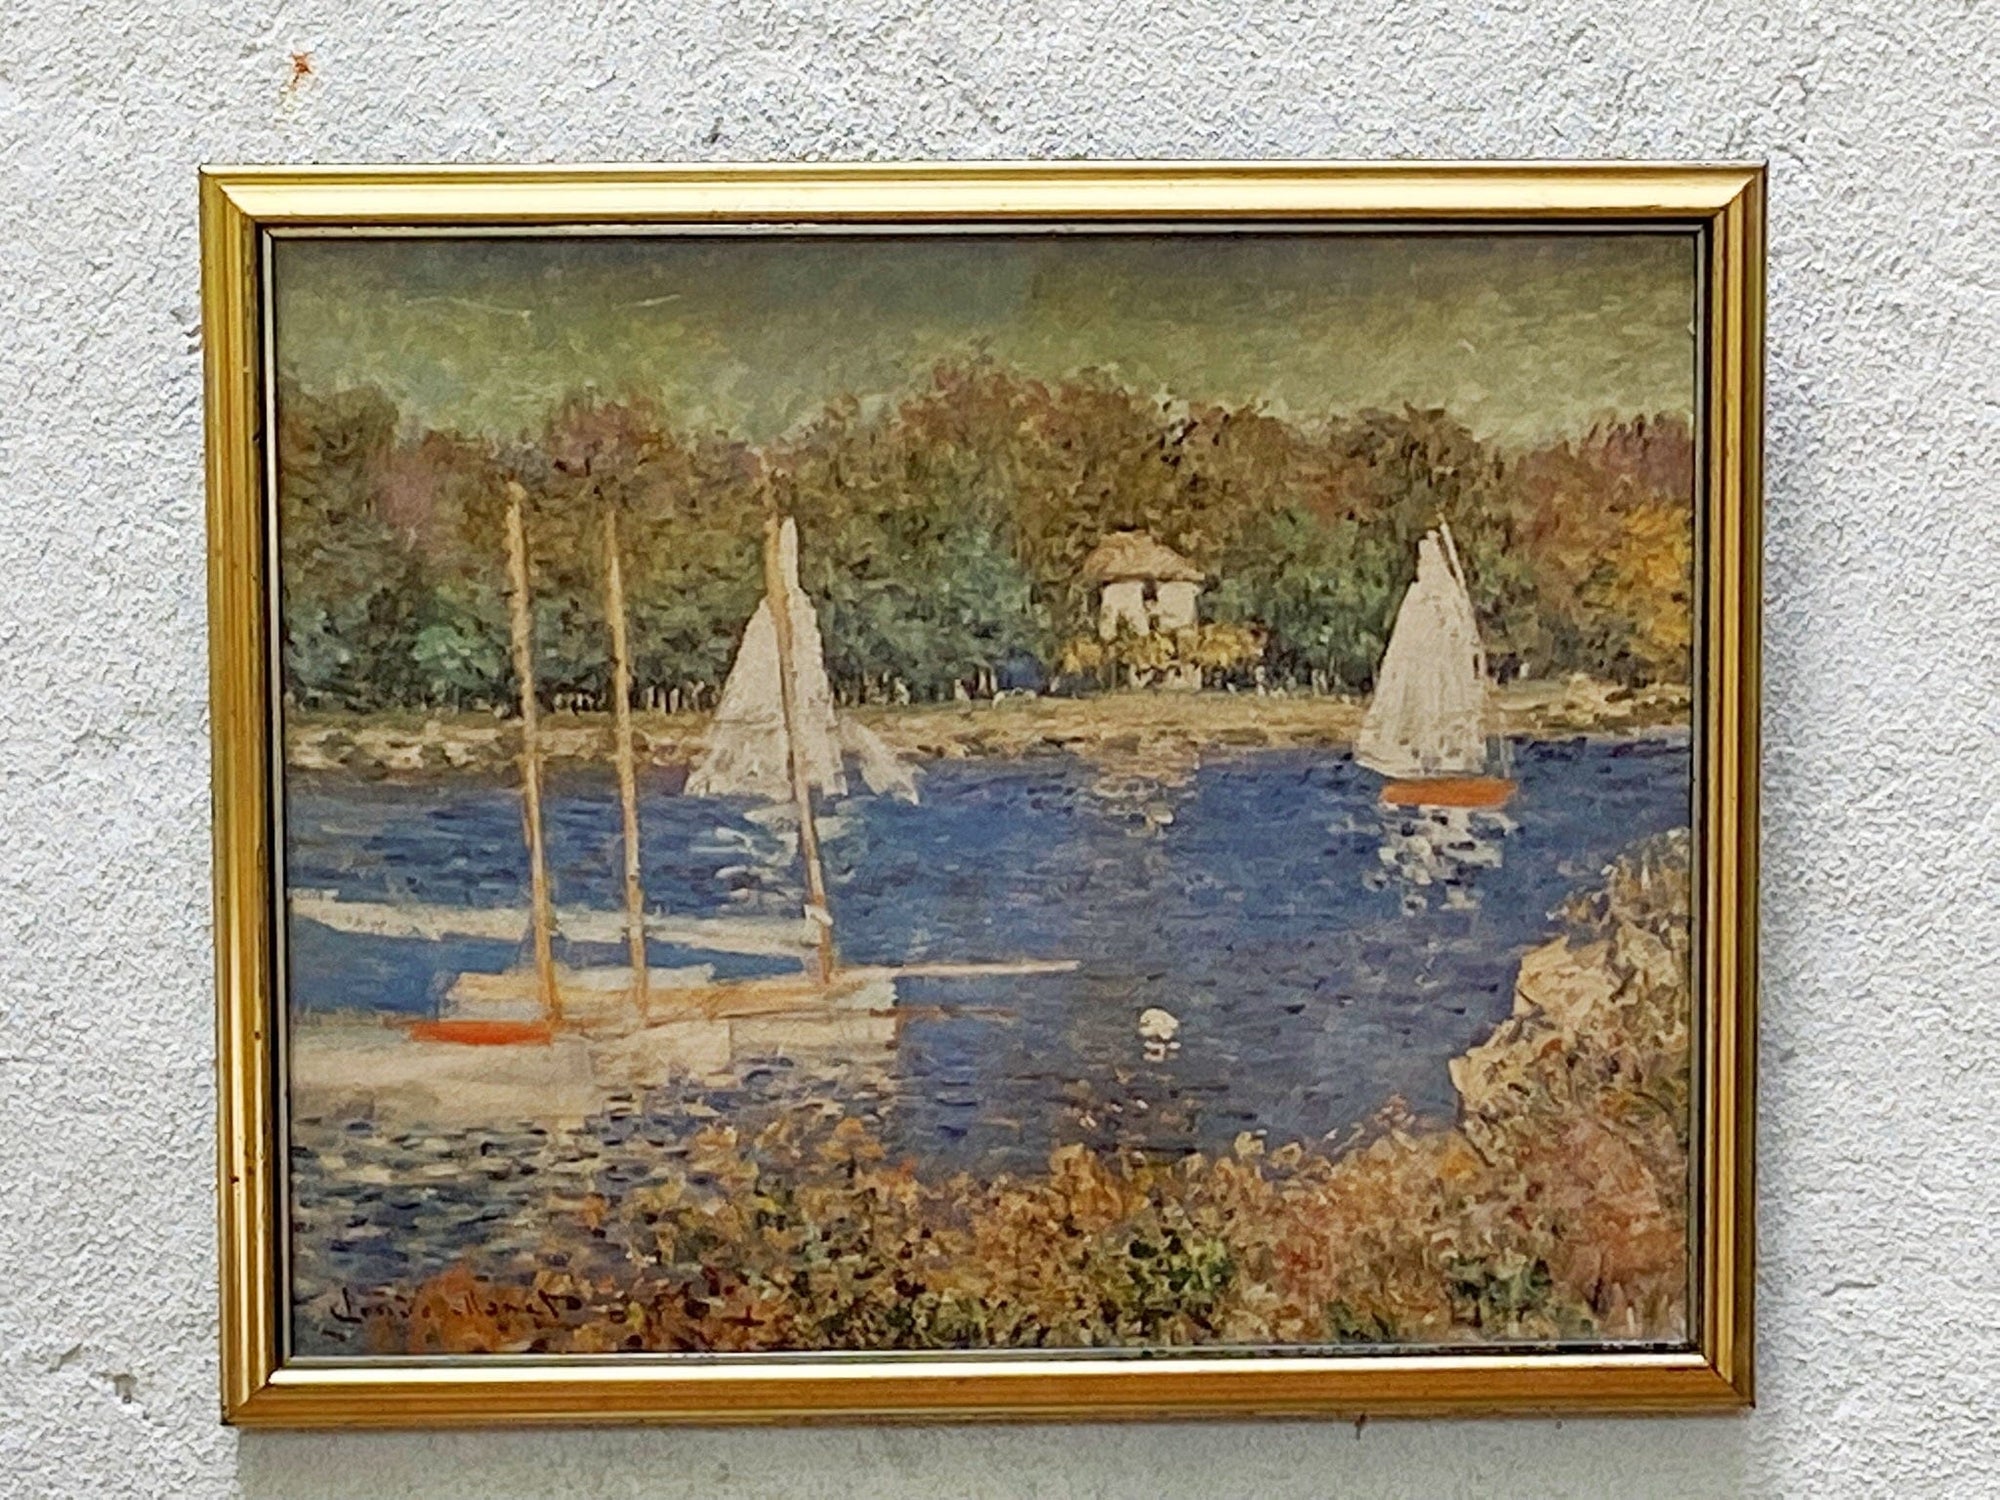 I Like Mike's Mid Century Modern Artwork Sailboats At The Basin by Claude Monet Framed Textured Print on Board